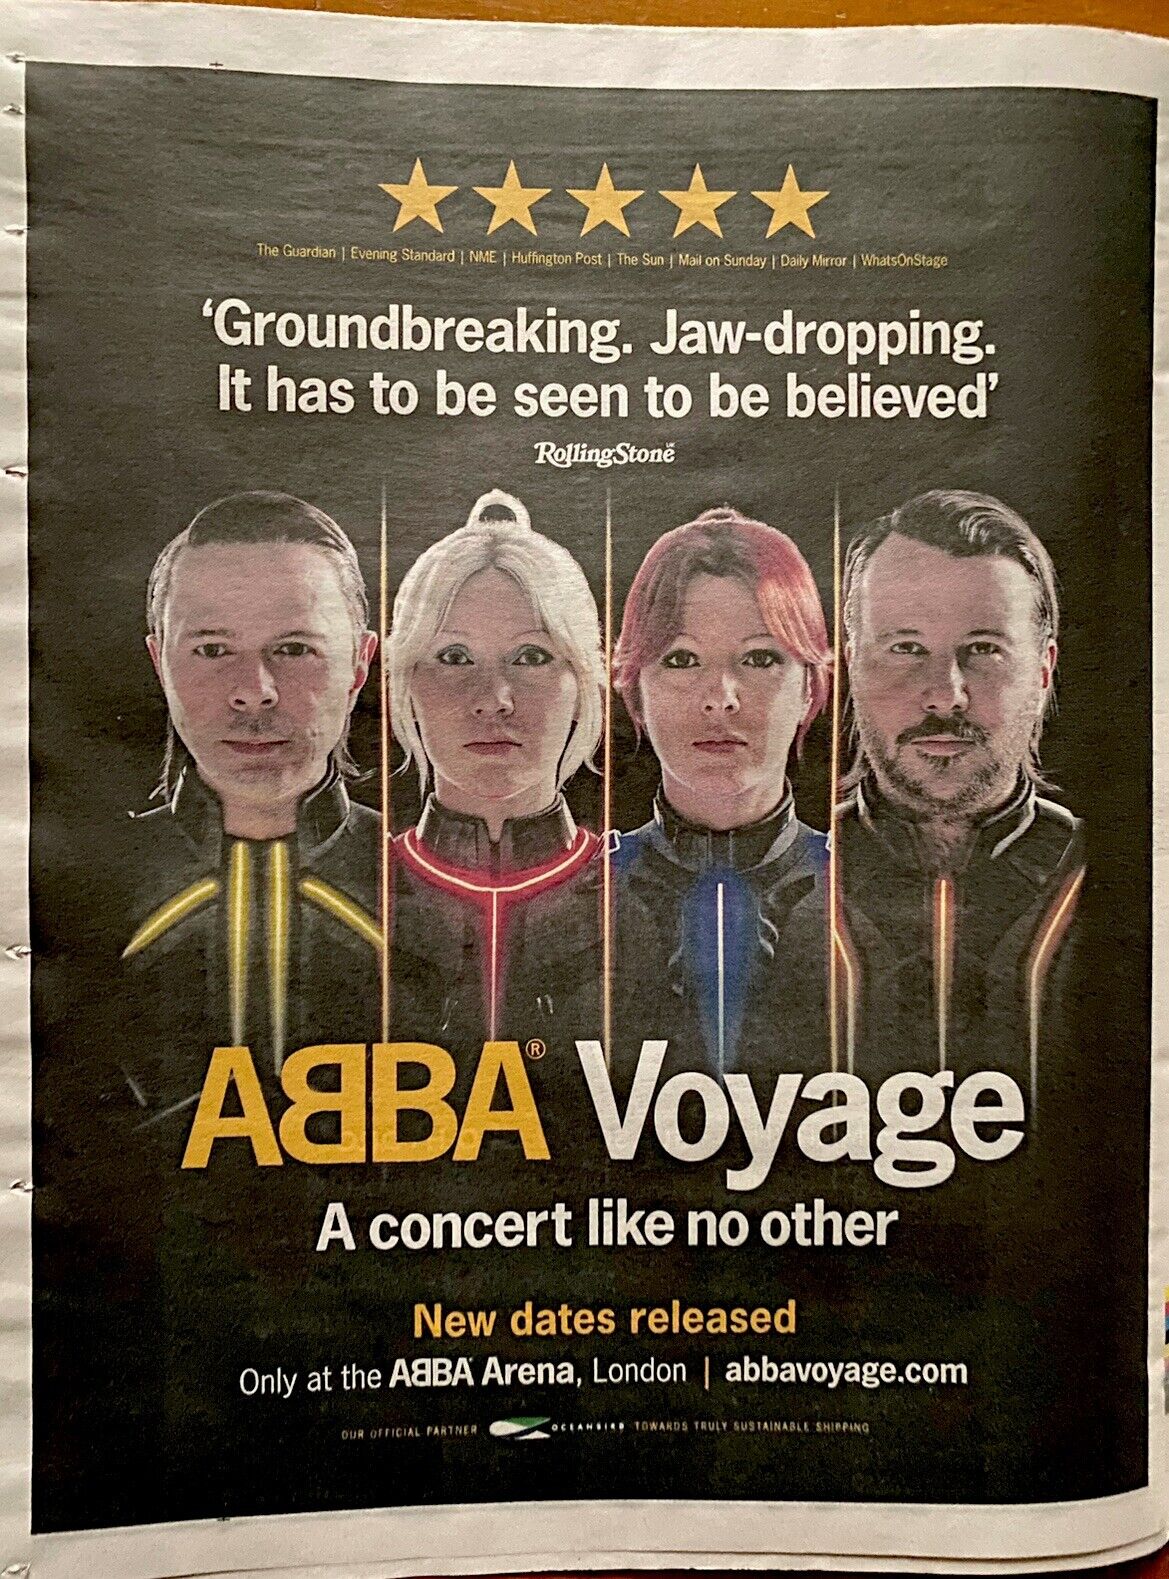 ABBA Voyage Concert Like No Other Newspaper Advert Poster Full Page Large 14x11”